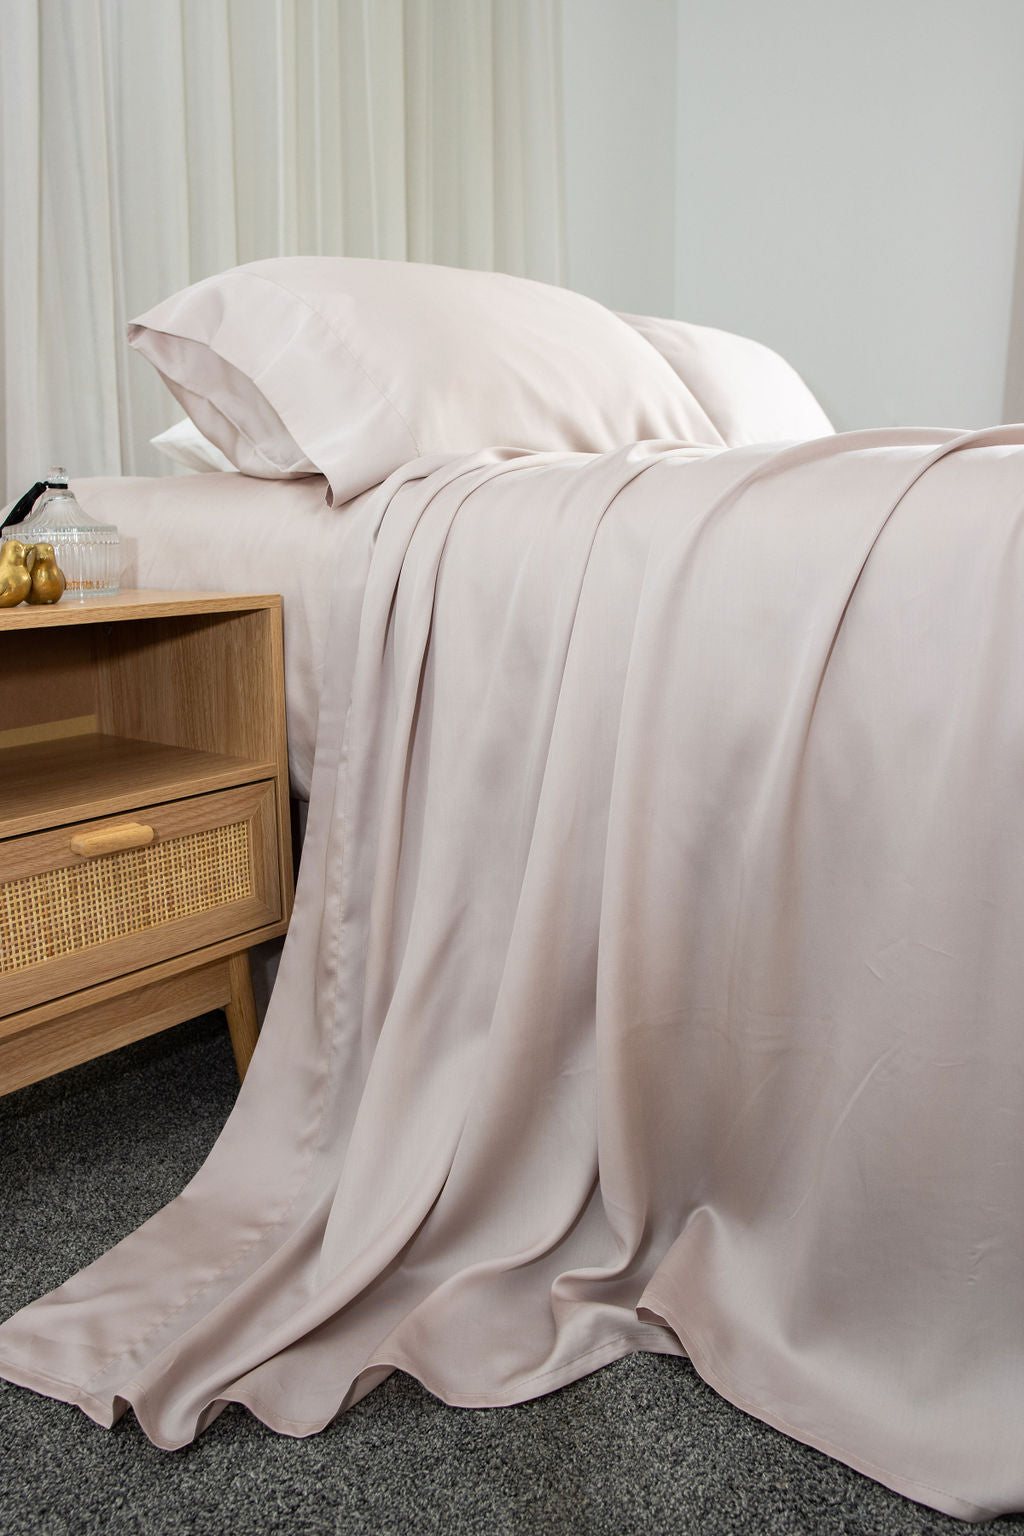 Dusty pink bed sheets draped, to one side, showcasing the sheet texture as well as pilows popped up on the bed next to a bedside table with ornaments.